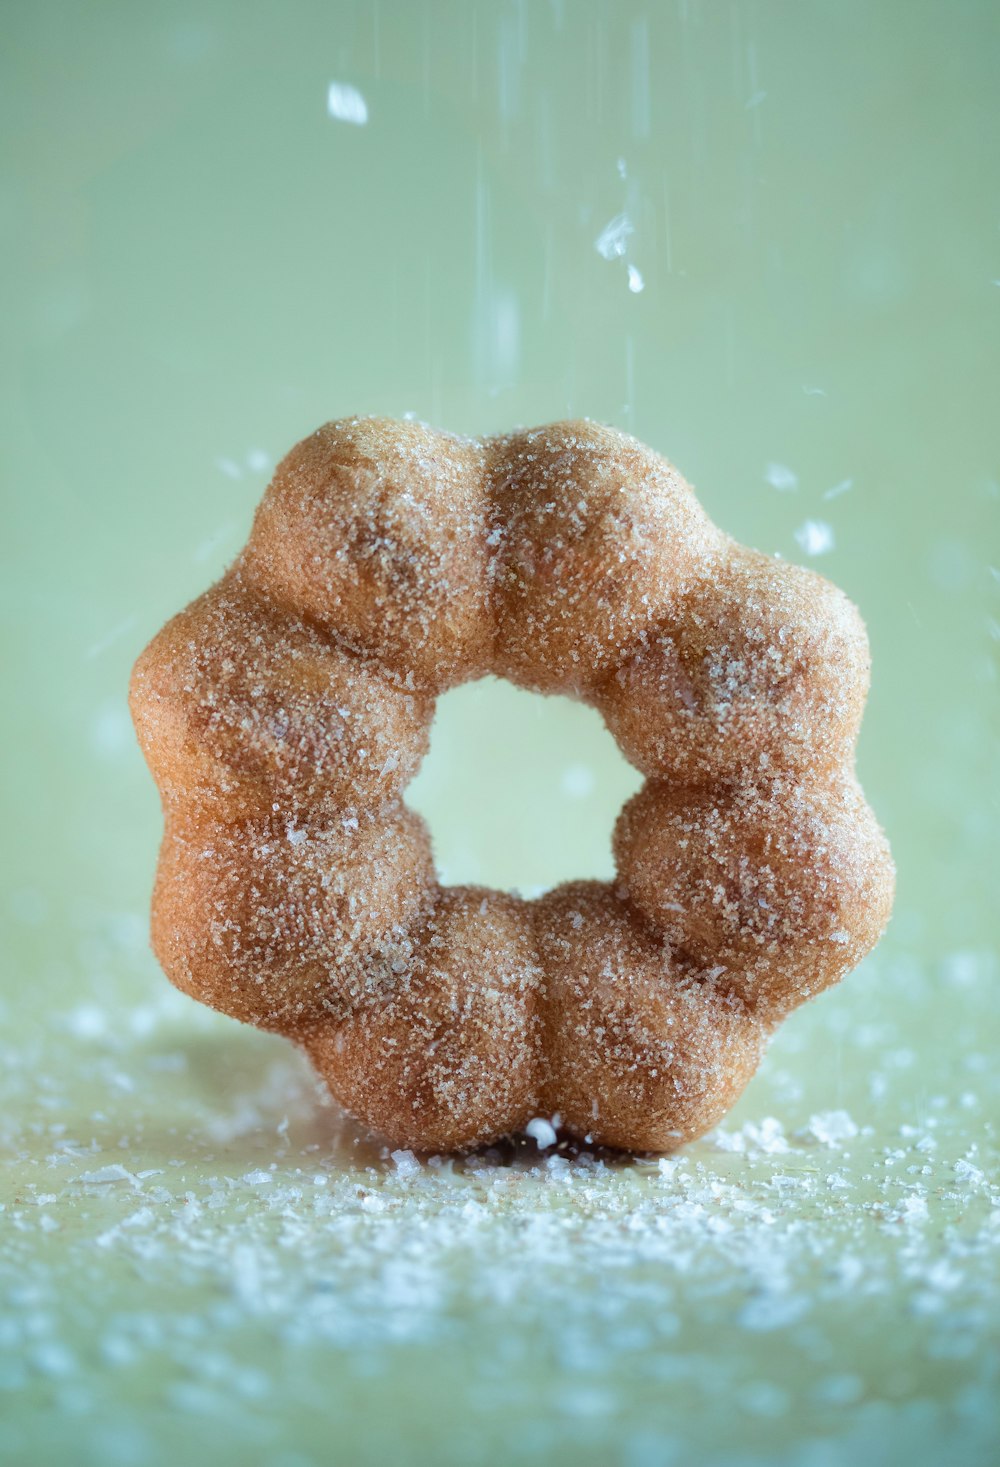 a sugary donut is sprinkled with sugar